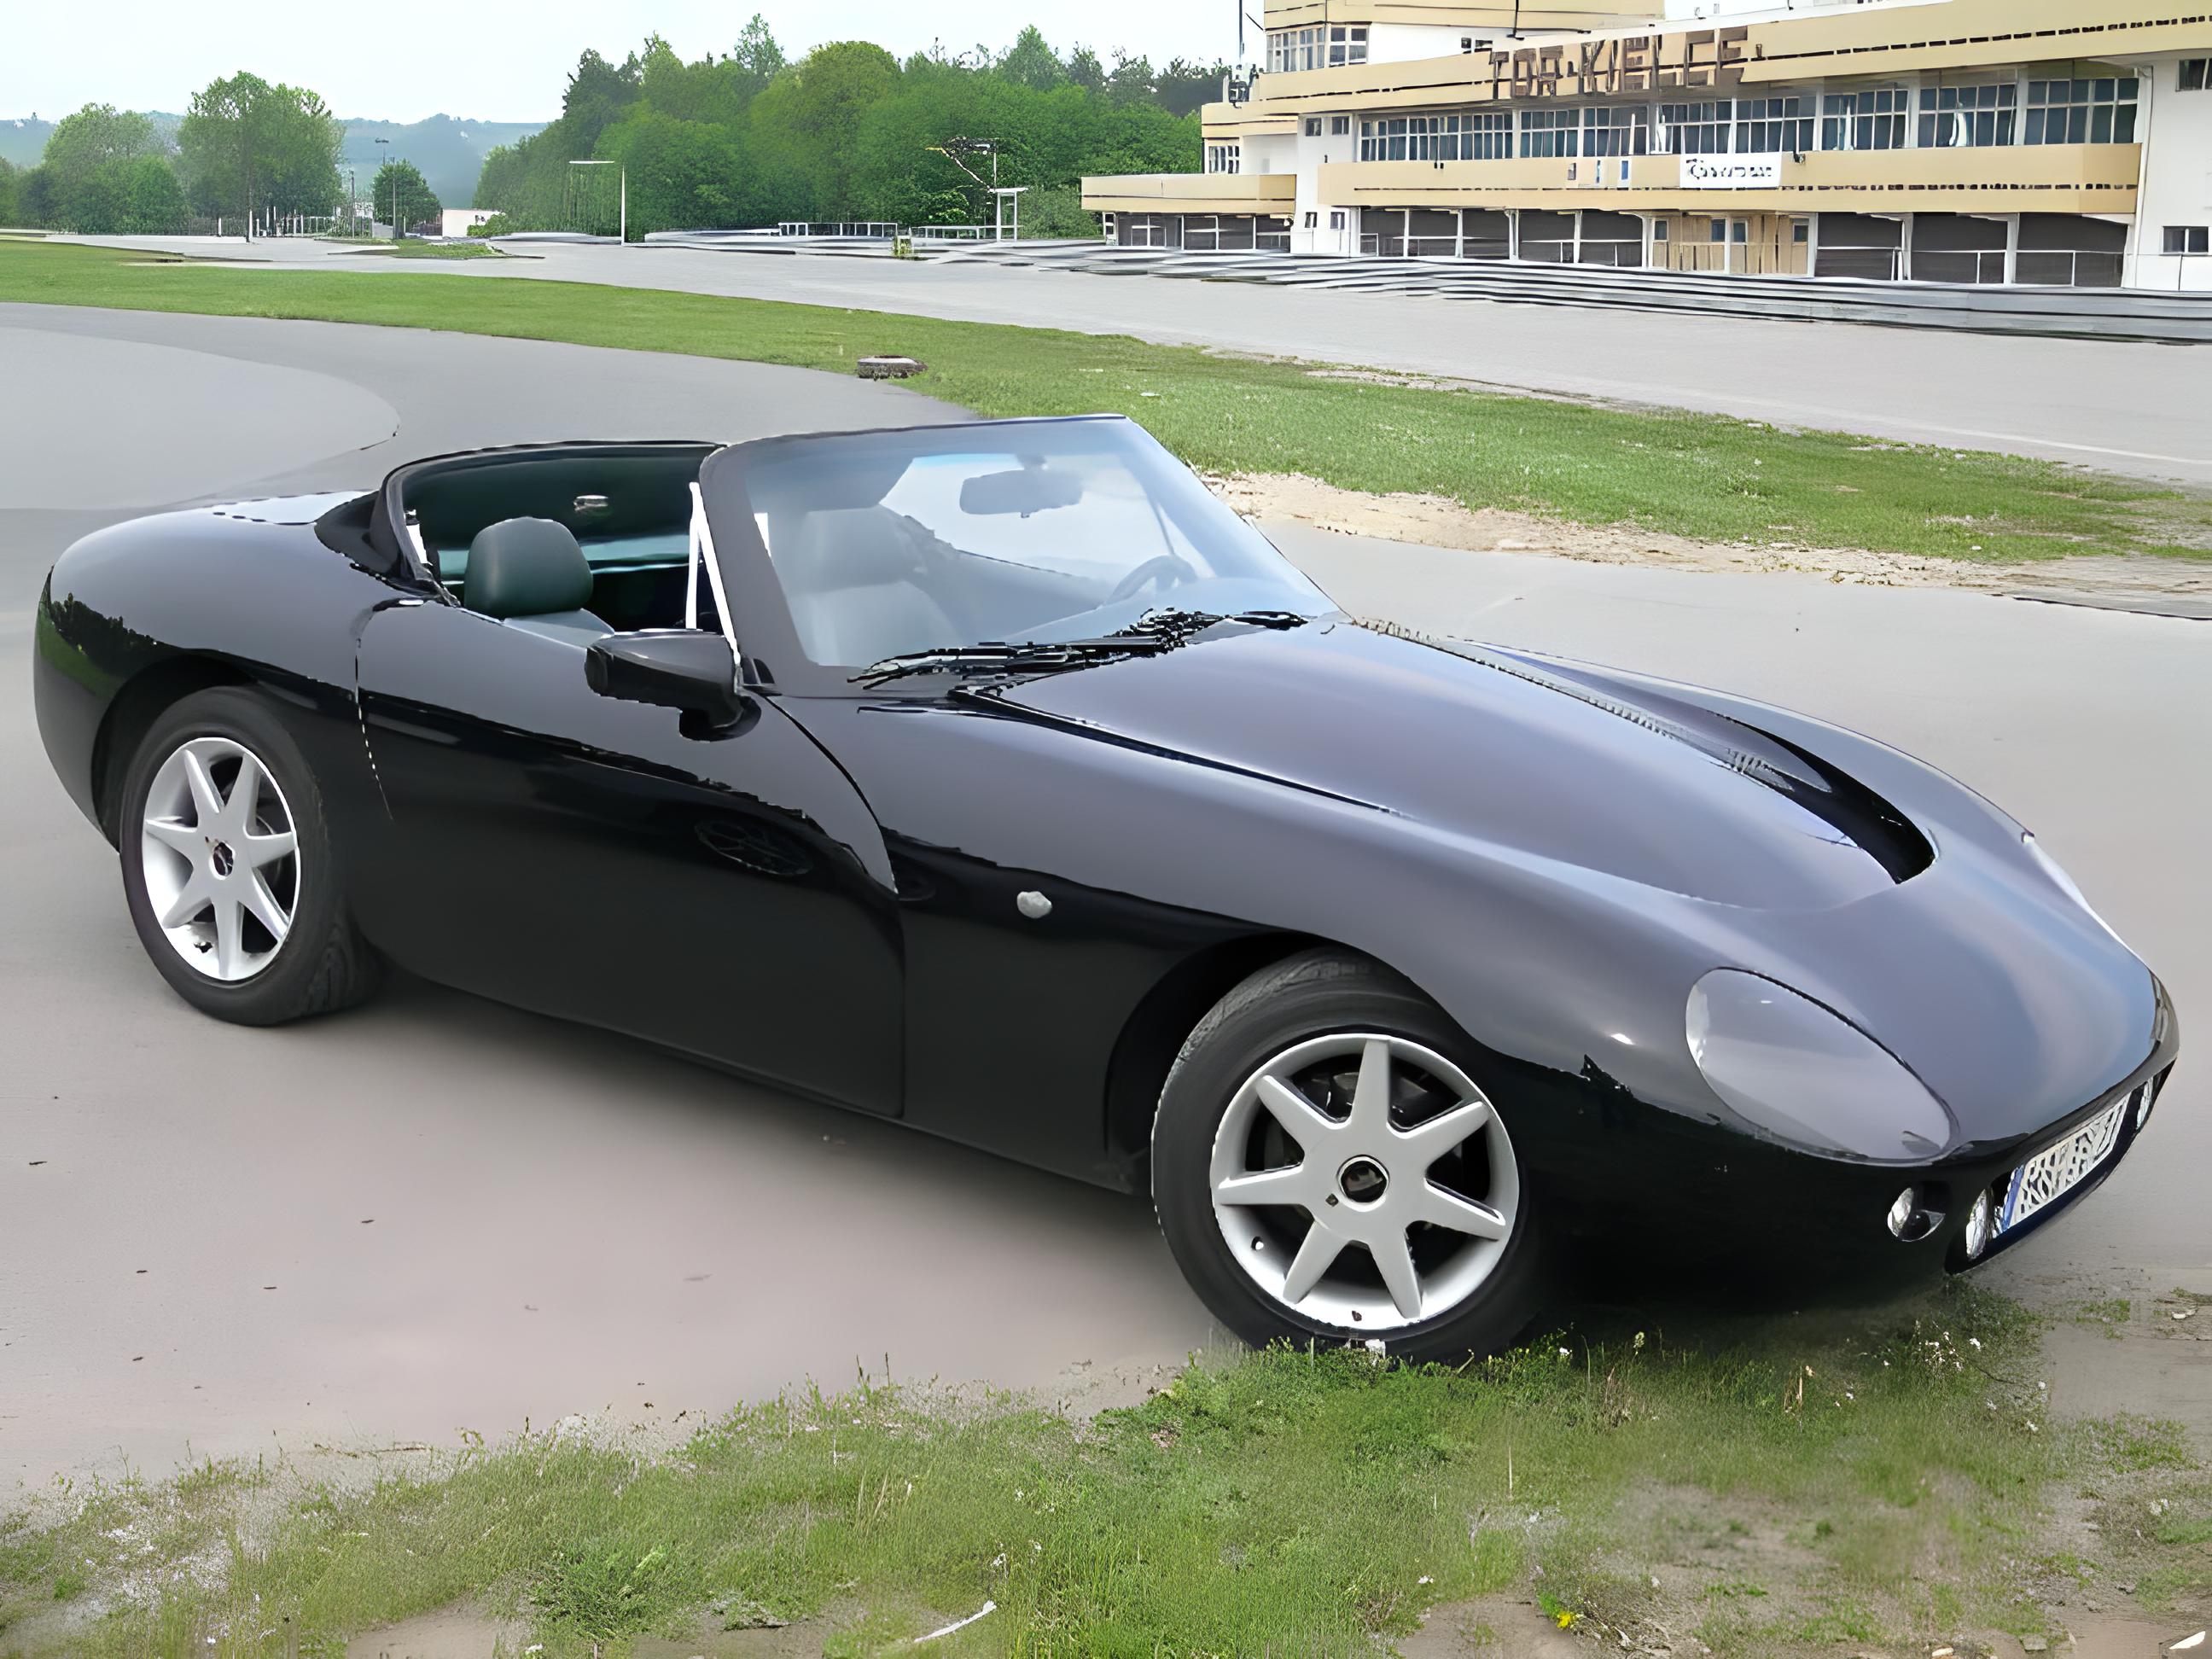 TVR Griffith image #10